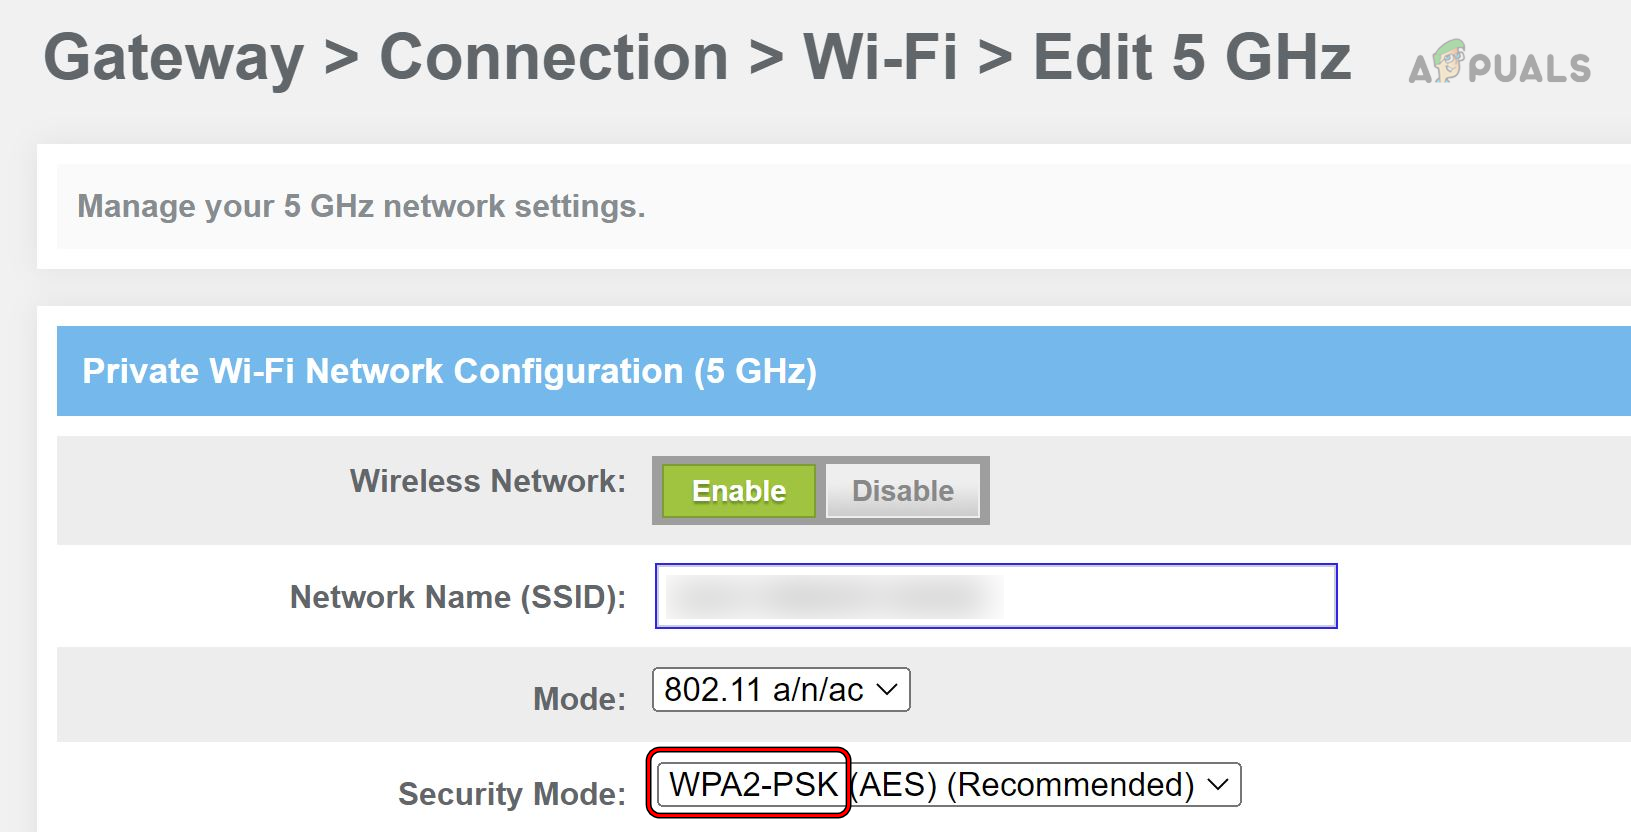 Change the Security Mode to WPA or WPA2